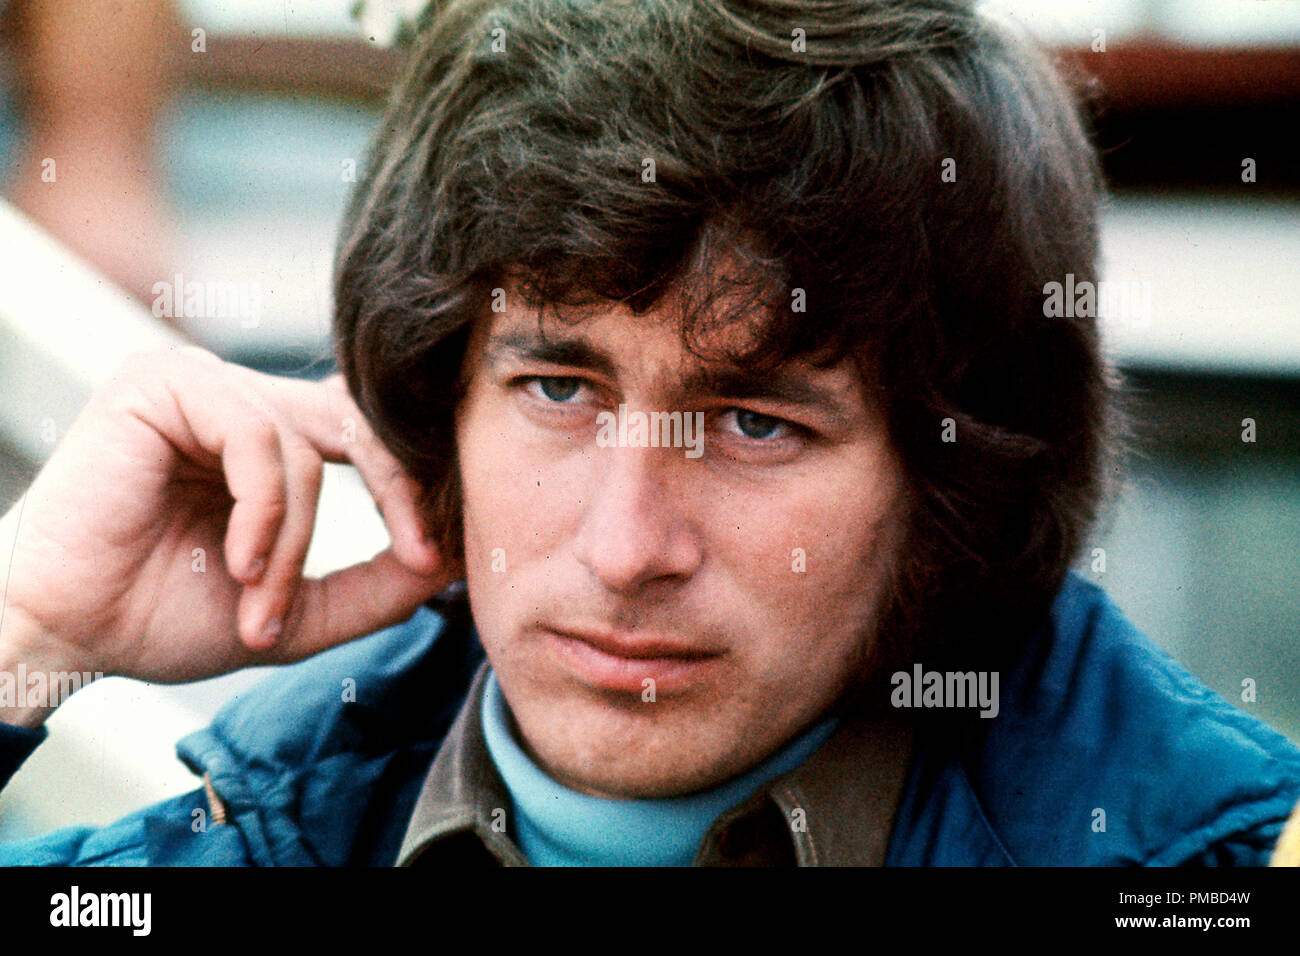 El director Steven Spielberg, 'Jaws' (1975) Universal Pictures File Reference # 32914 958tha Foto de stock